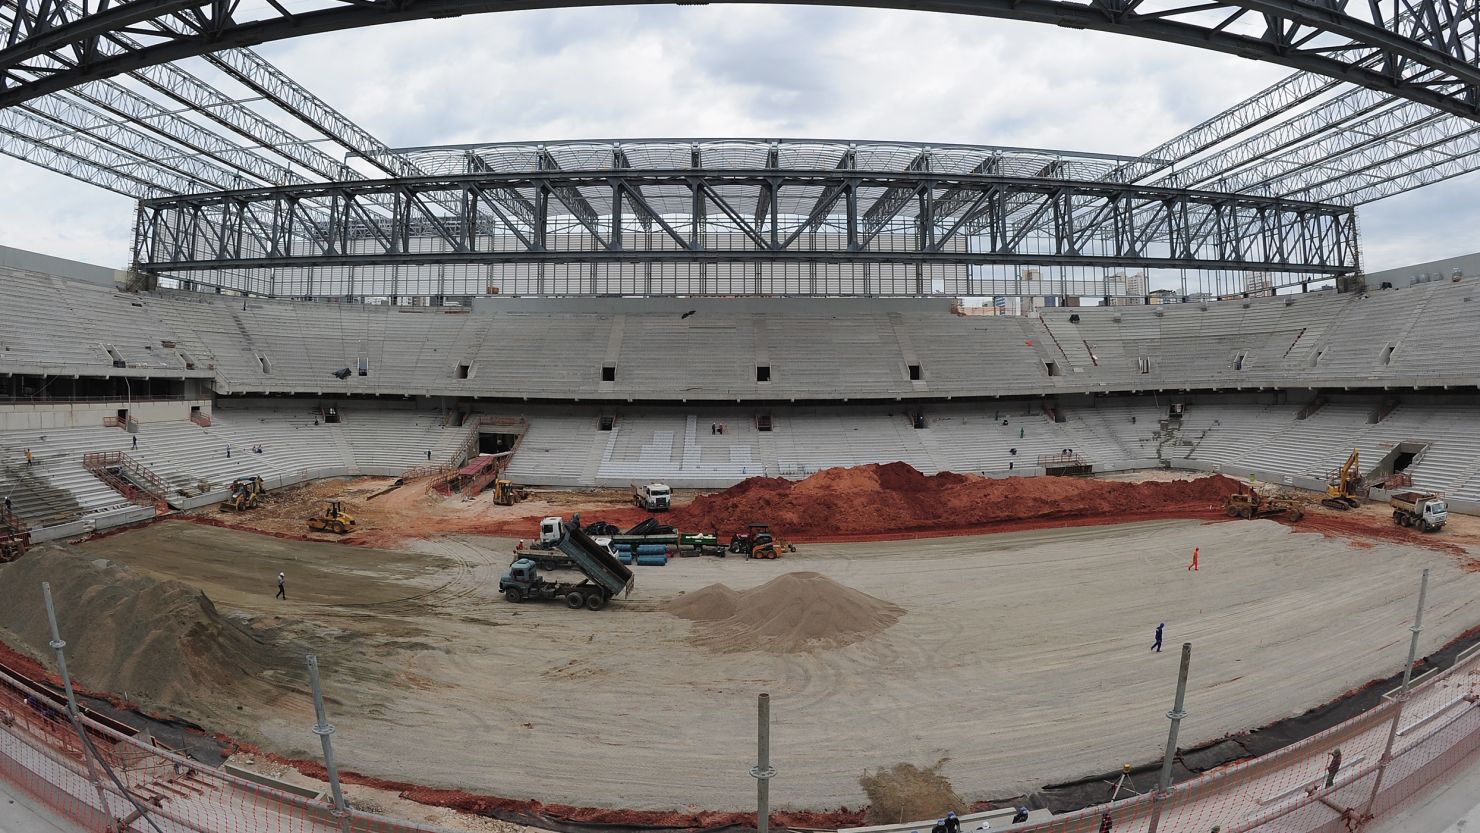 Construction has slowed at the Arena da Baixada World Cup venue in Curitiba, Brazil, shown here in December 2013.